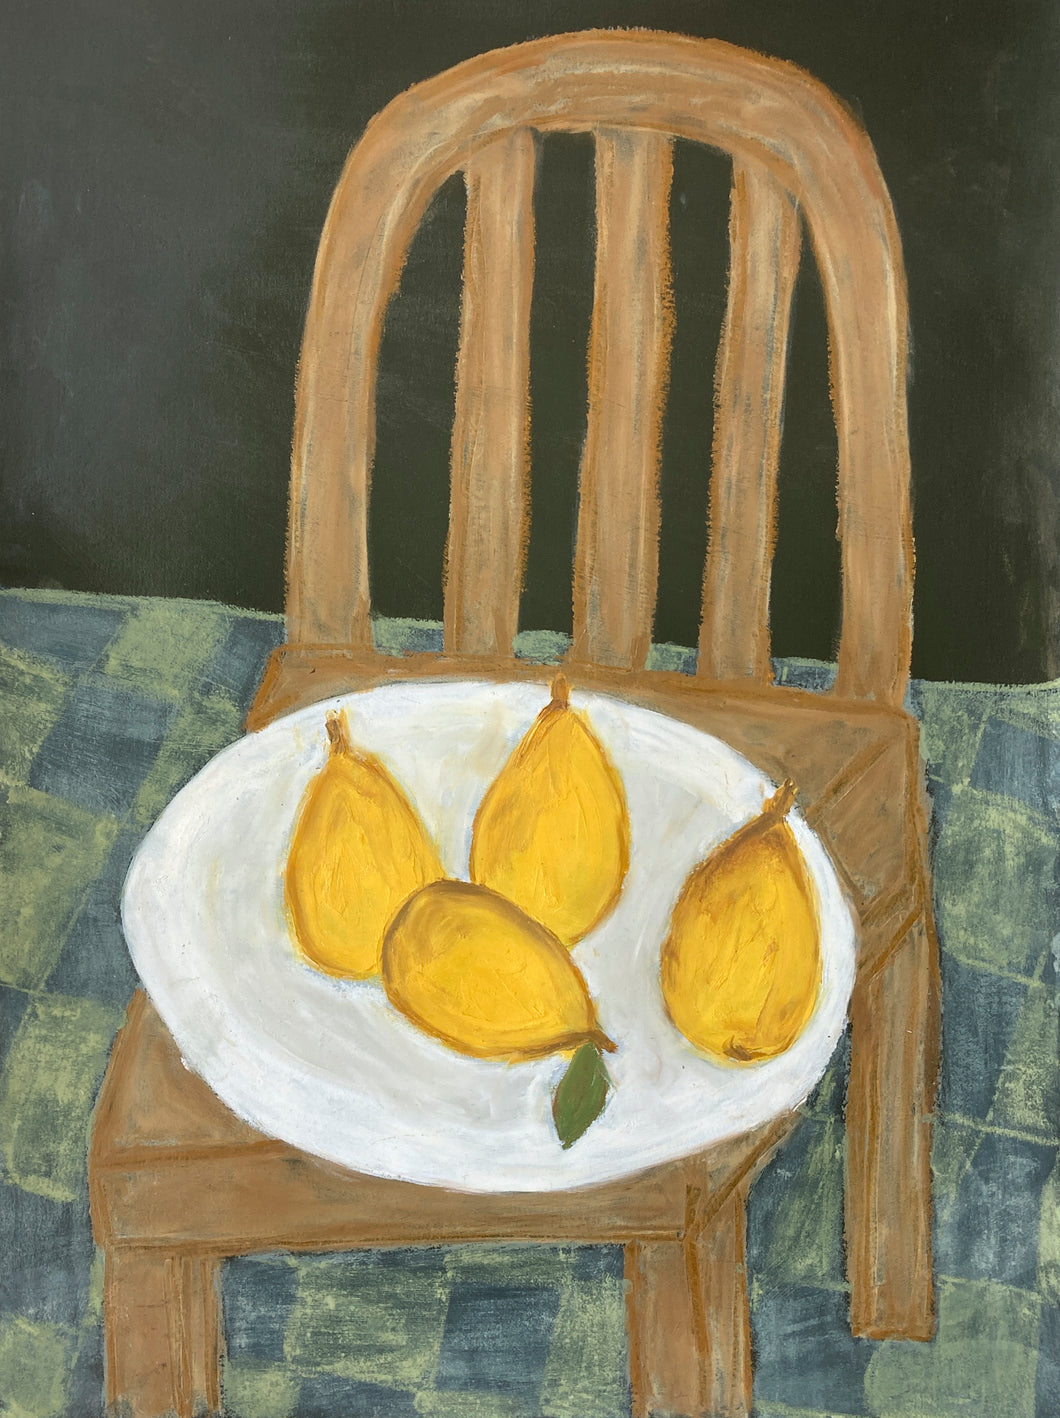 Plate of Quinces on Chair